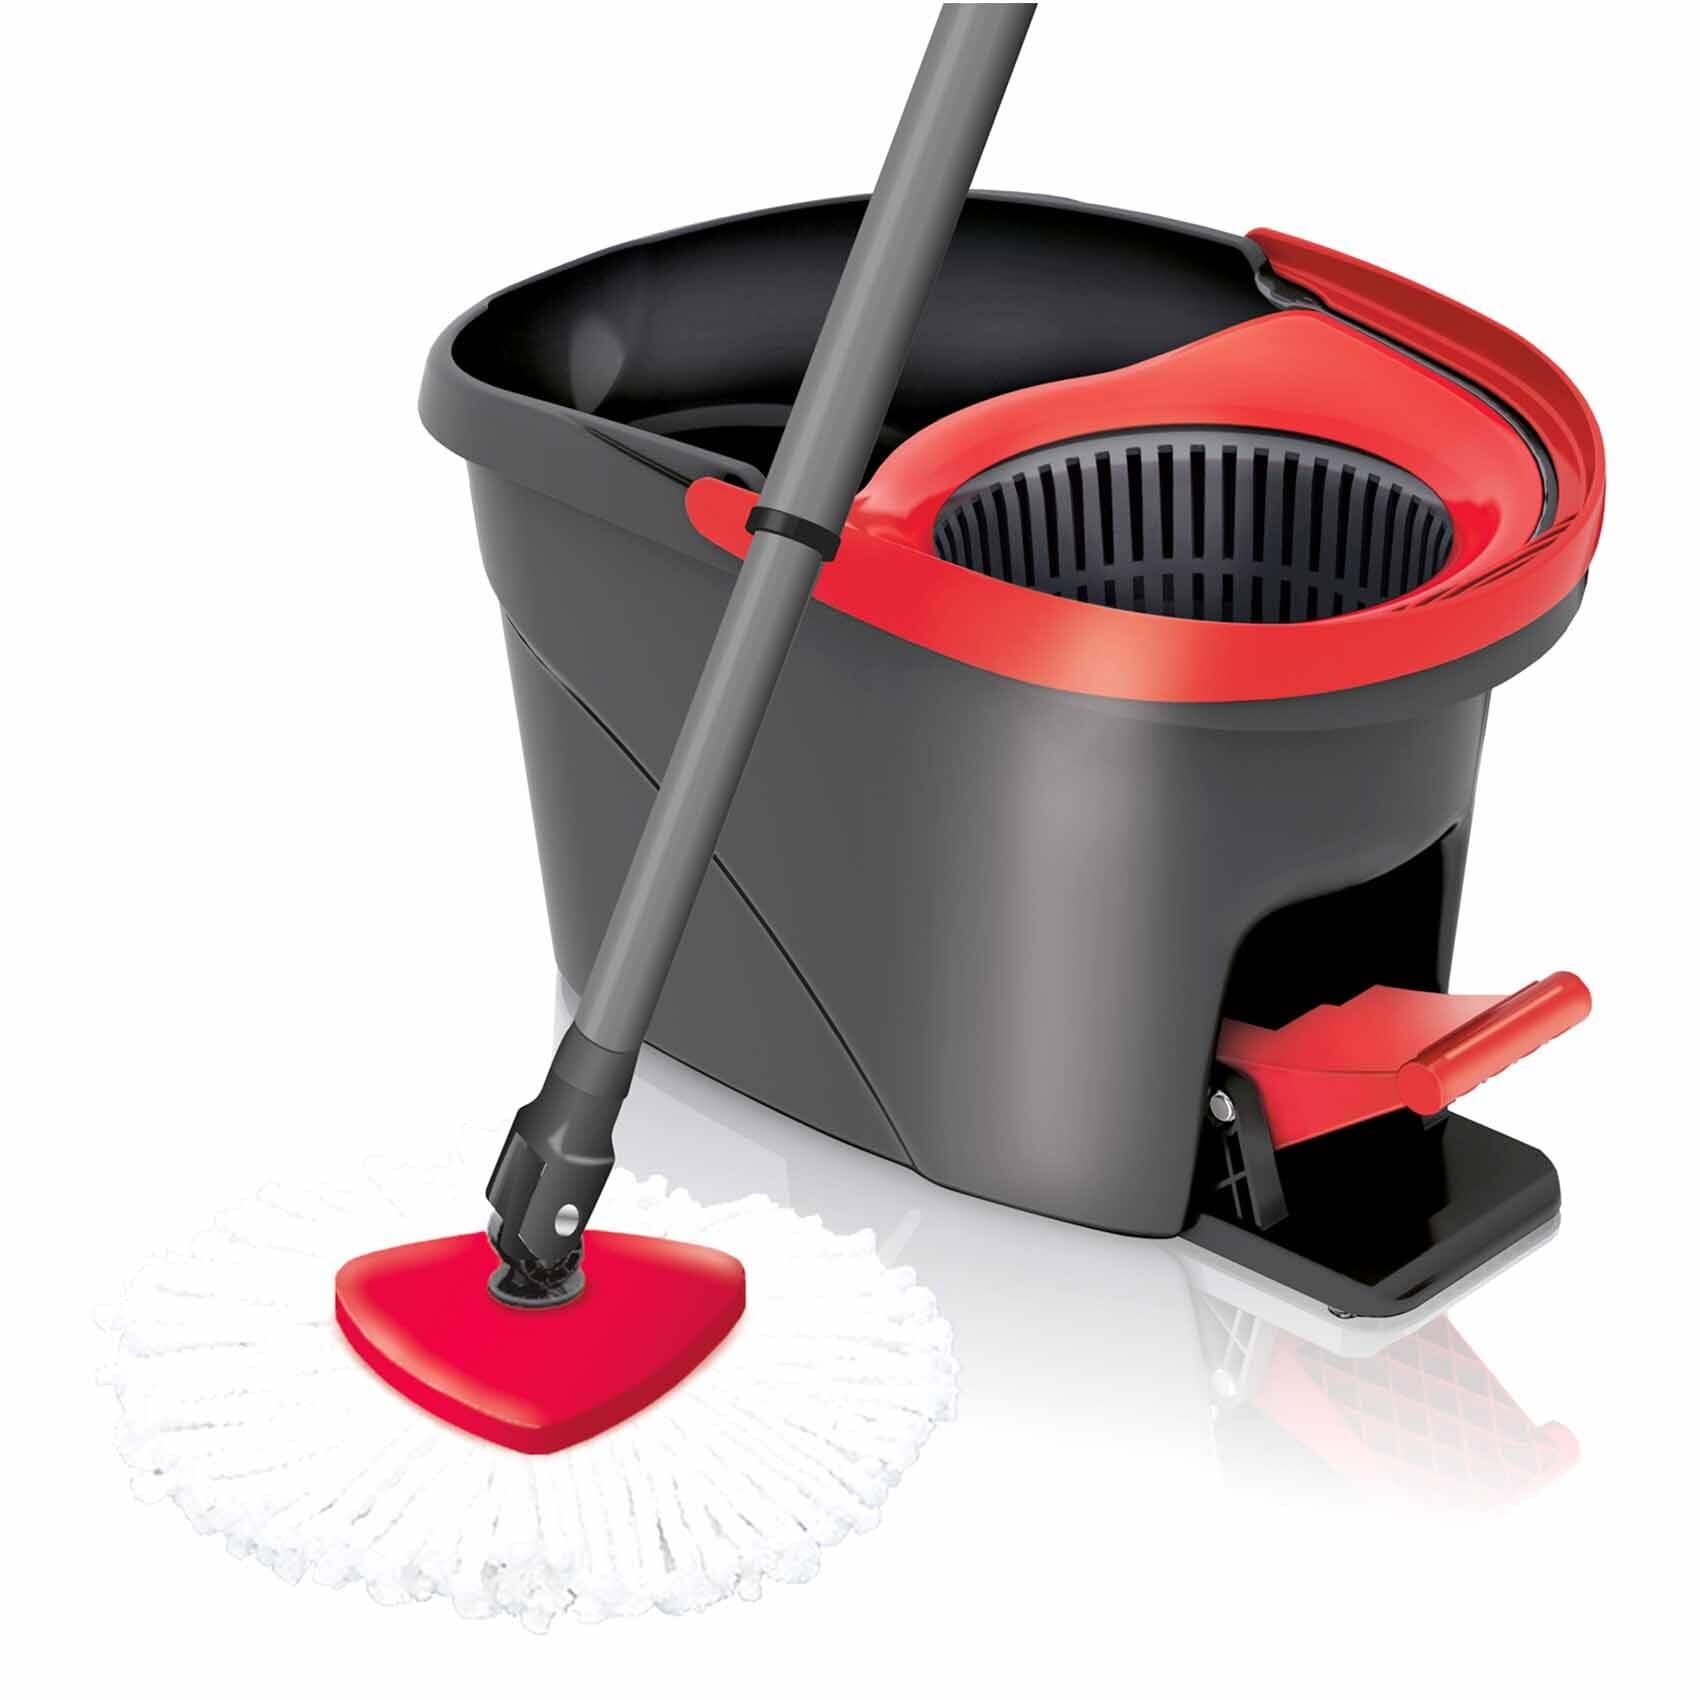 Vileda Turbo 2in1 Pedal Cleaning Set Microfiber mop and bucket Spin Wringer  eco-friendly telescopic handle removable head